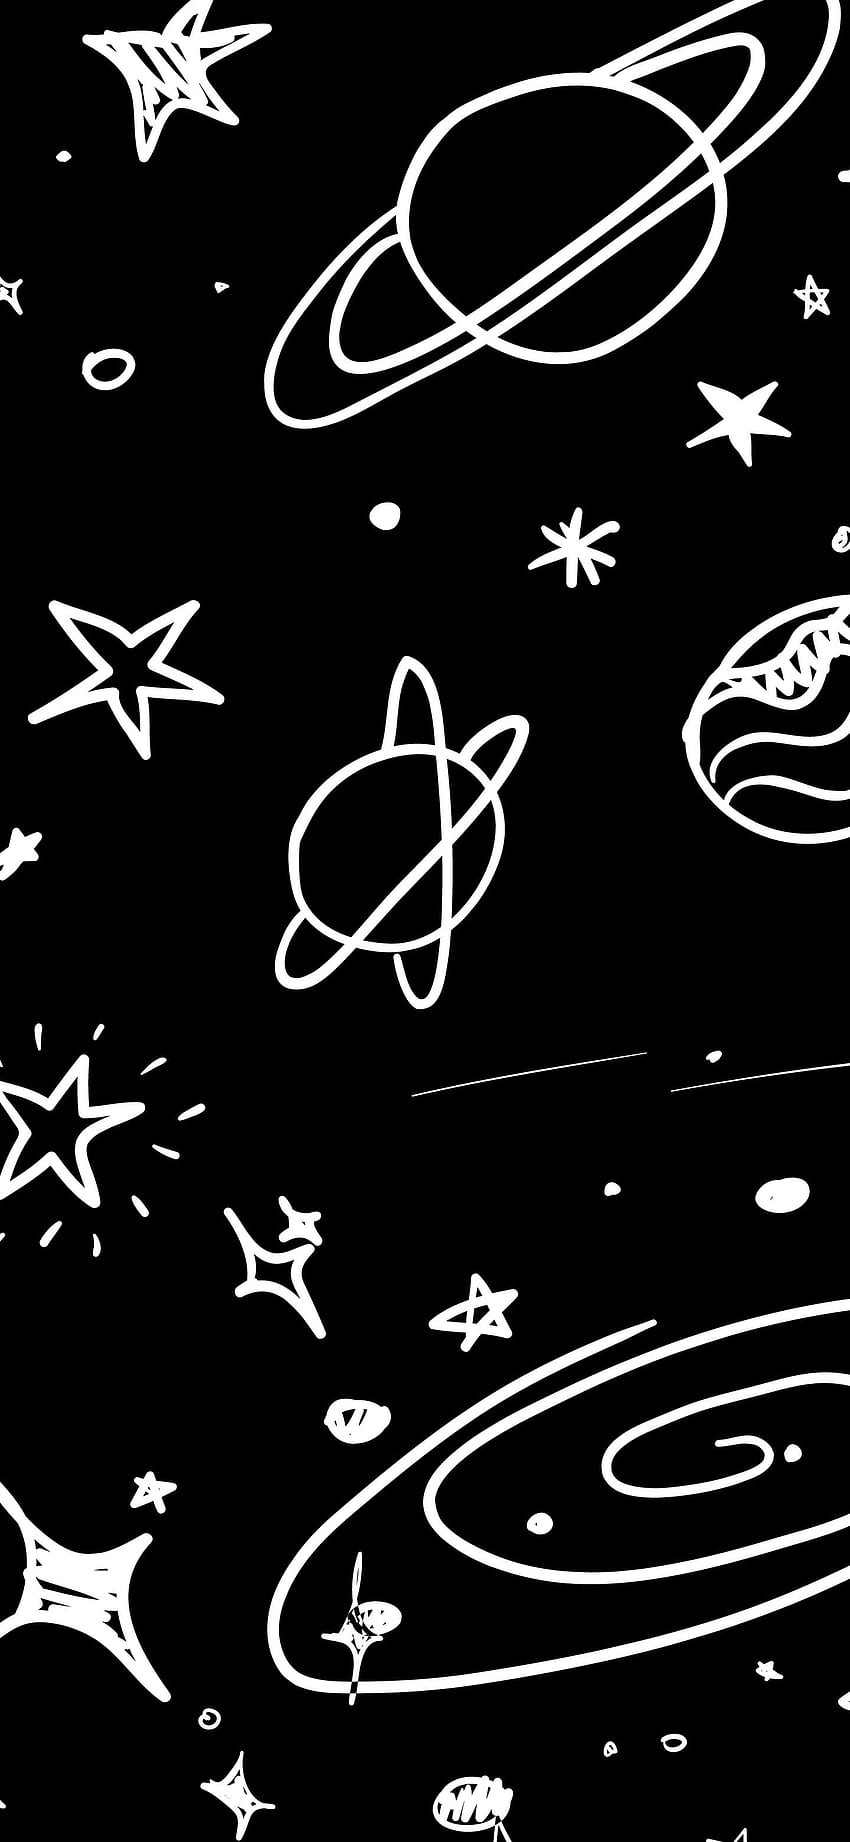 Black and white wallpaper of the solar system - Doodles